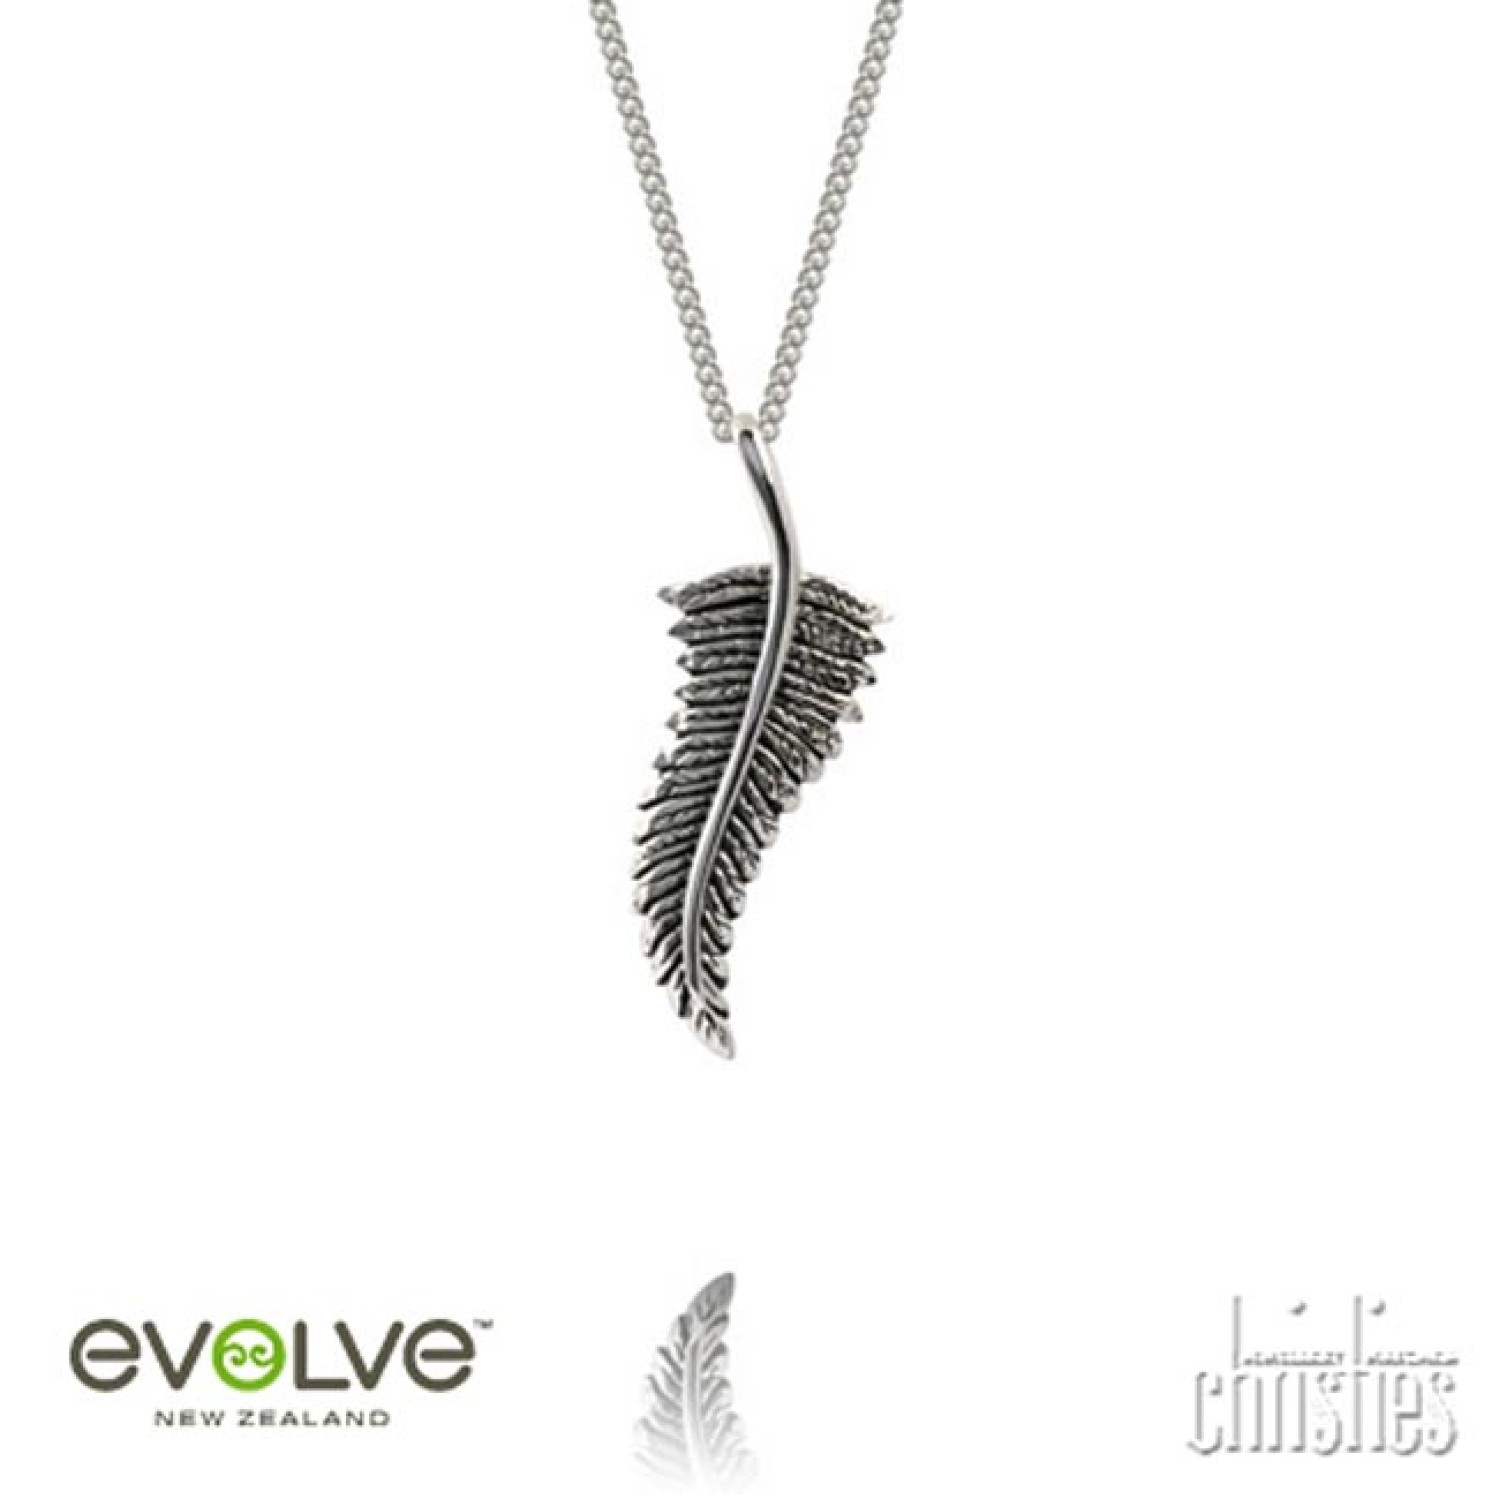 3P11022 Evolve Forever Fern Silver Necklace. Evolves  Forever Fern Necklace is a symbol of all that we treasure, celebrating eternal pride and admiration.Crafted in Sterling Silver Christies exclusive 5 year guarantee Supplied with s45cm terling Silver pe